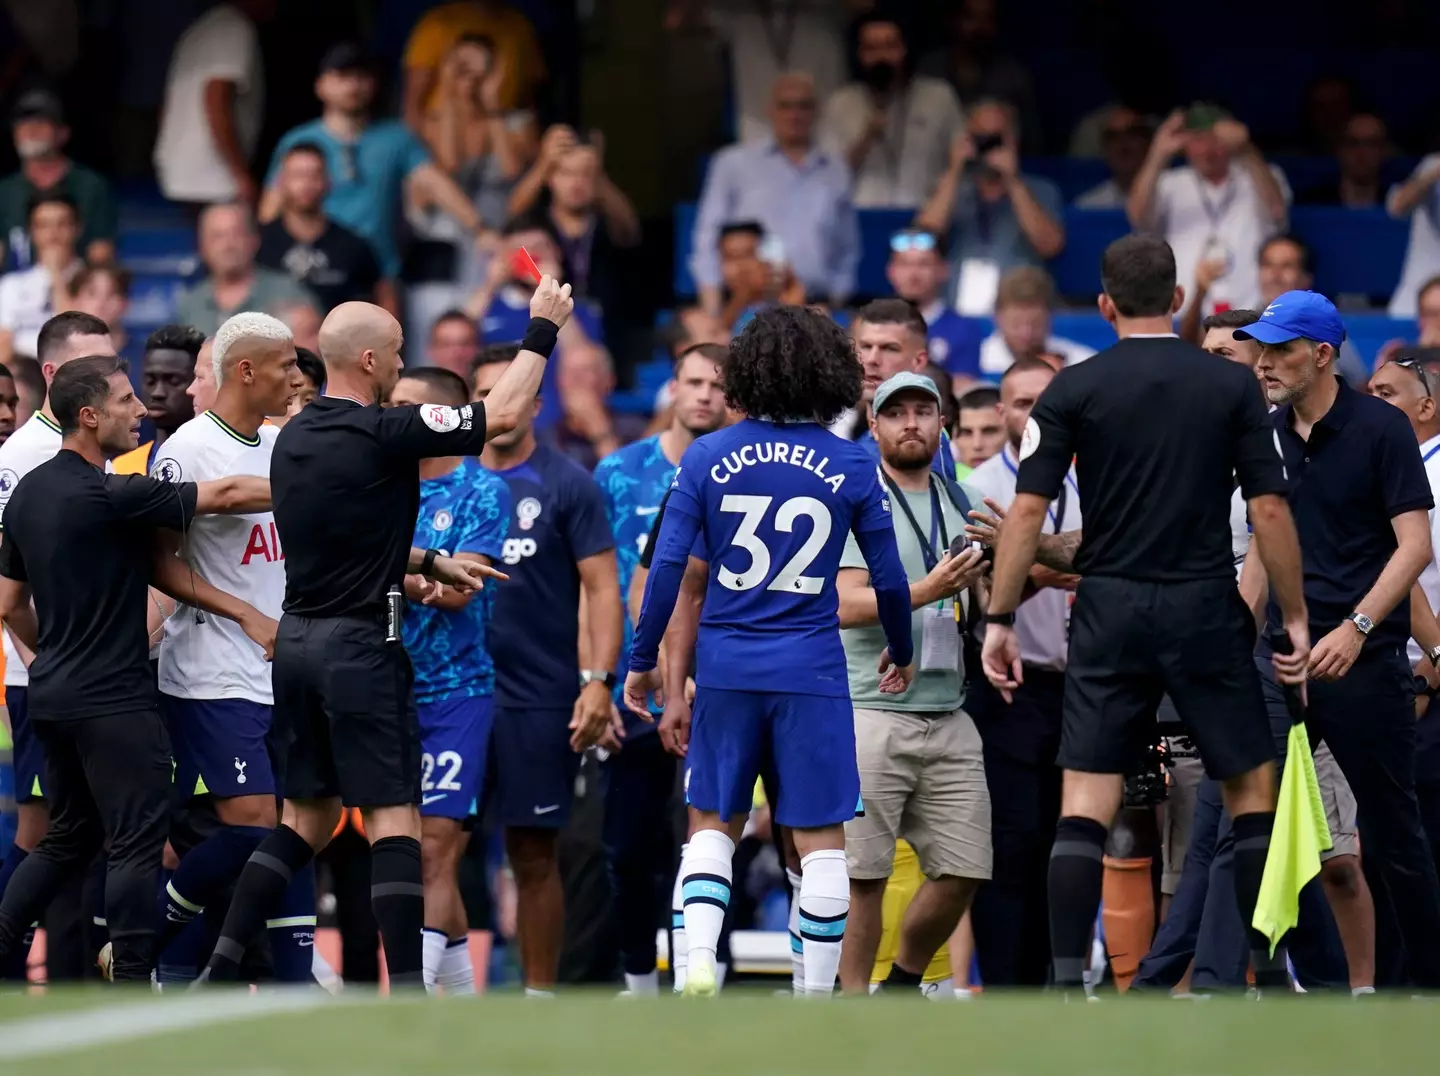 Chelsea manager Thomas Tuchel is sent off by referee Anthony Taylor during the Premier League match at Stamford Bridge.